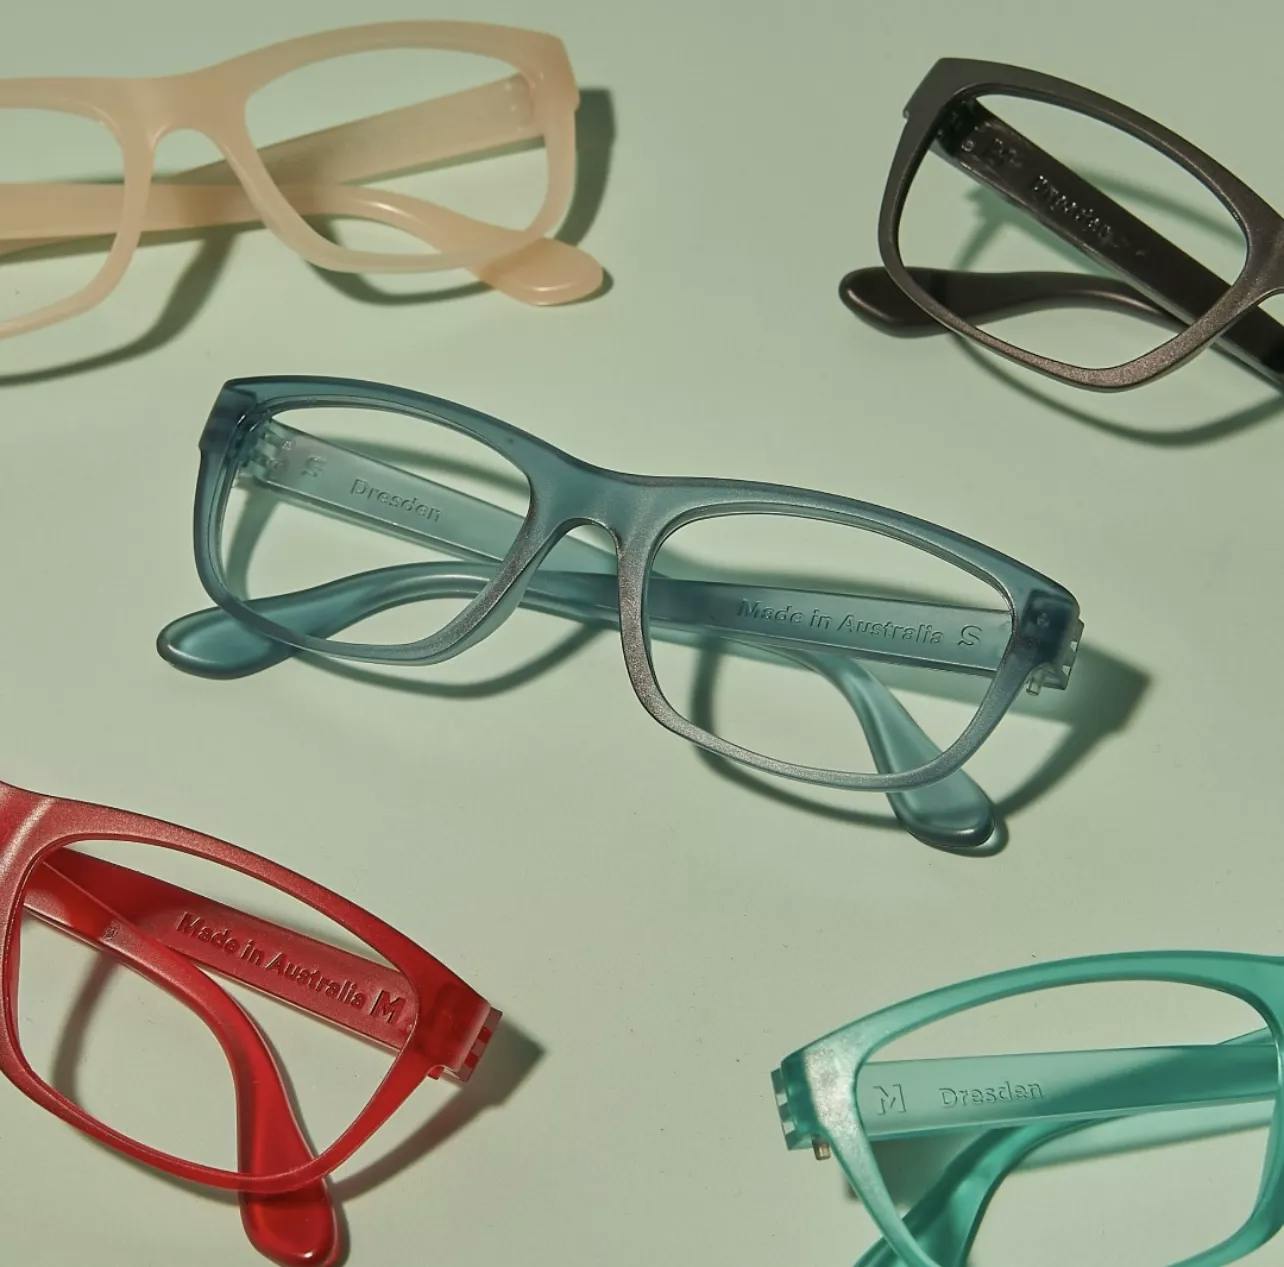 VOLUME 9:  OUR FRAMES AREN'T JUST DESIGNED IN AUSTRALIA, THEY'RE MADE HERE TOO! cover photo